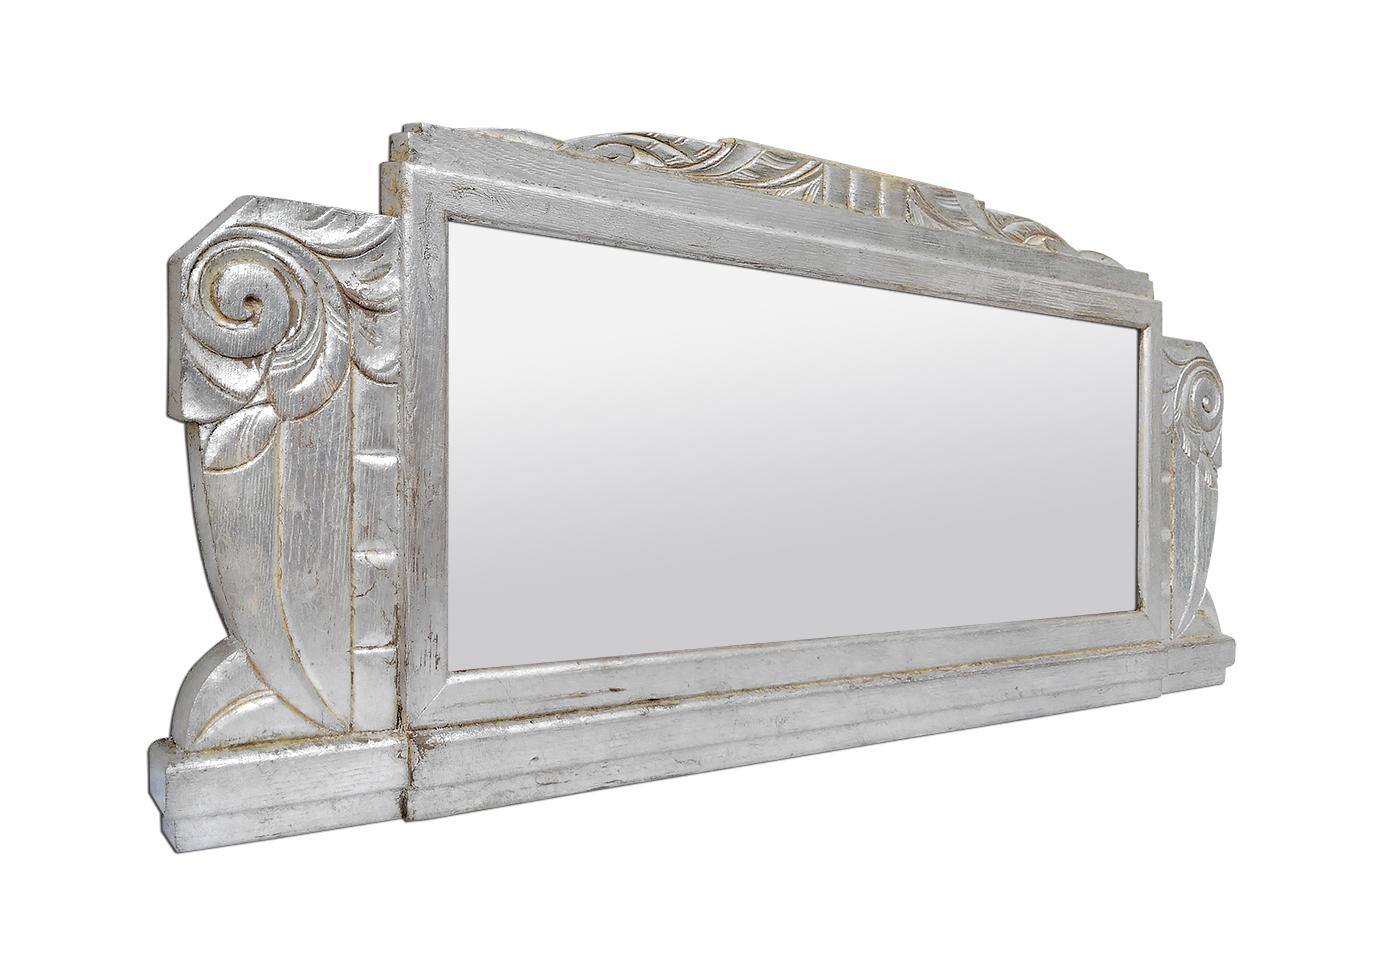 Large antique french wall mirror in carved silvered oak wood with Art Deco style ornaments, circa 1940. Re-gilding to the leaf patinated. Antique frame width 15 cm / 5.90 in. Modern glass mirror. Antique wood back.